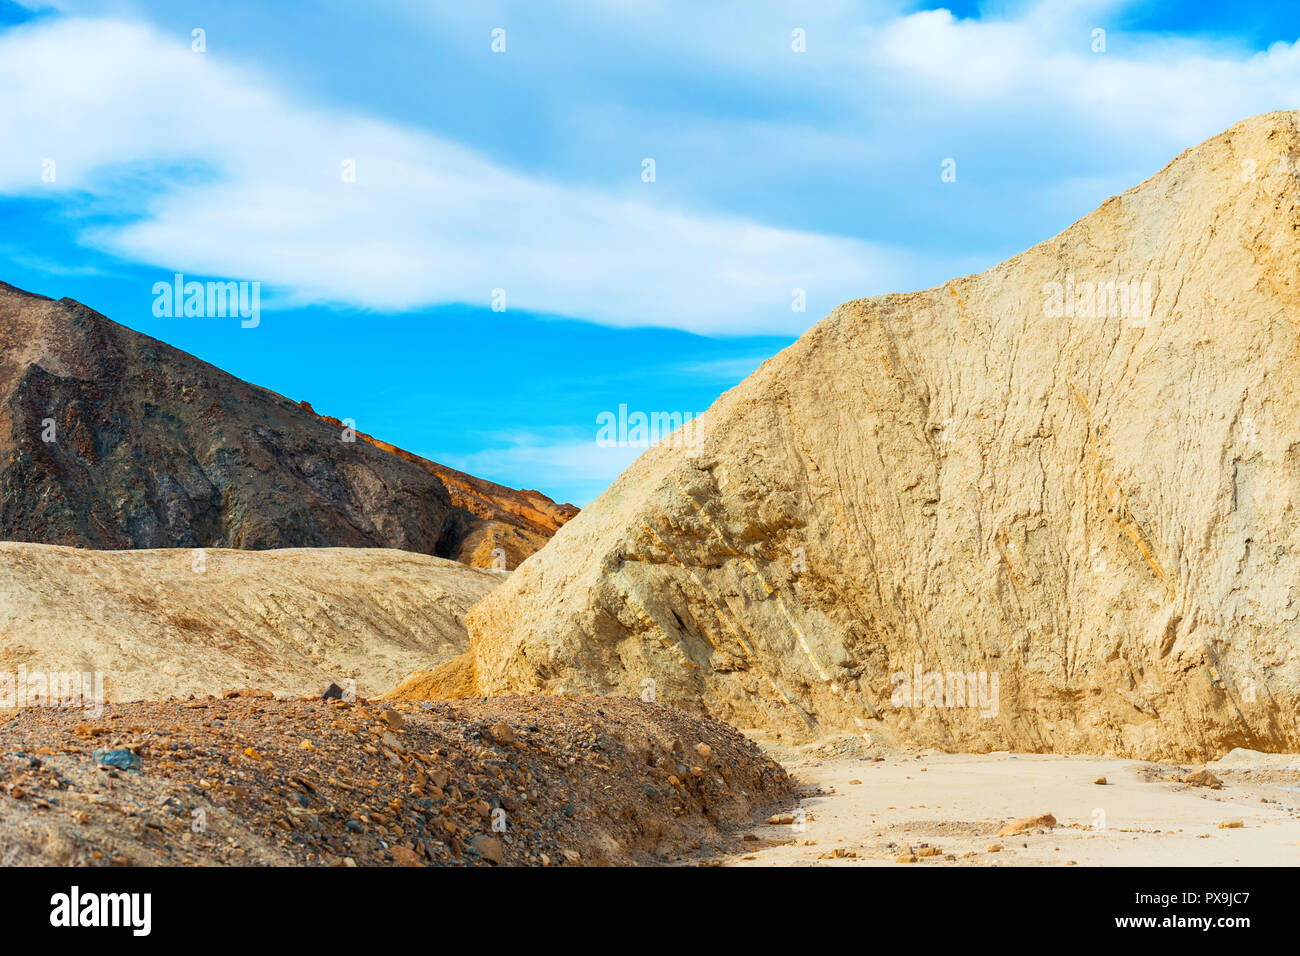 View of the Death Valley, California, USA. Copy space for text Stock Photo